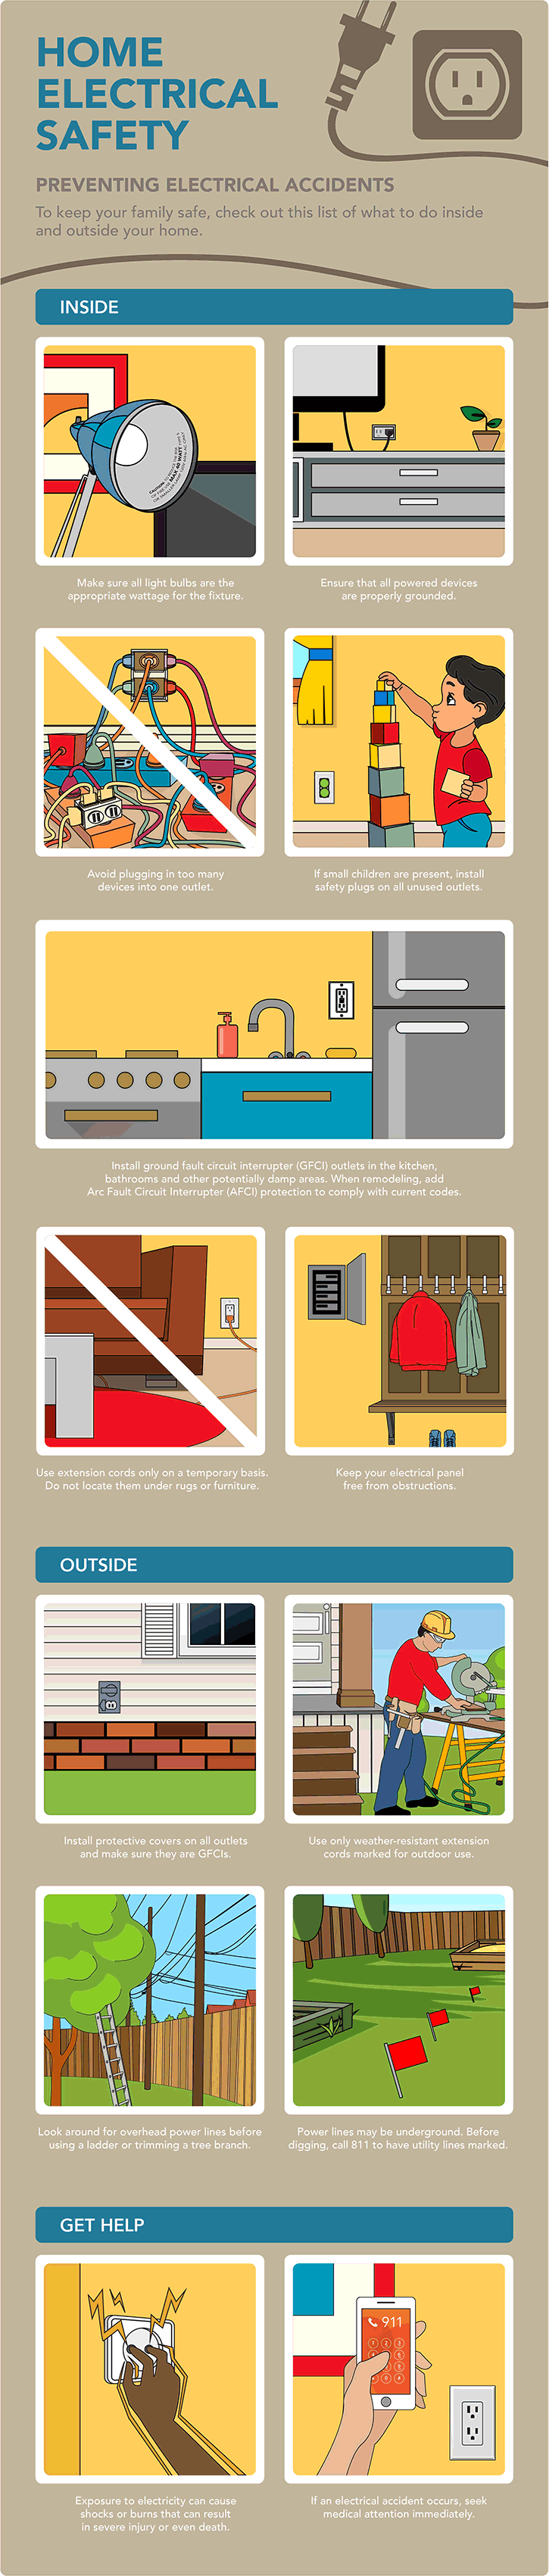 Home Electrical Safety infographic